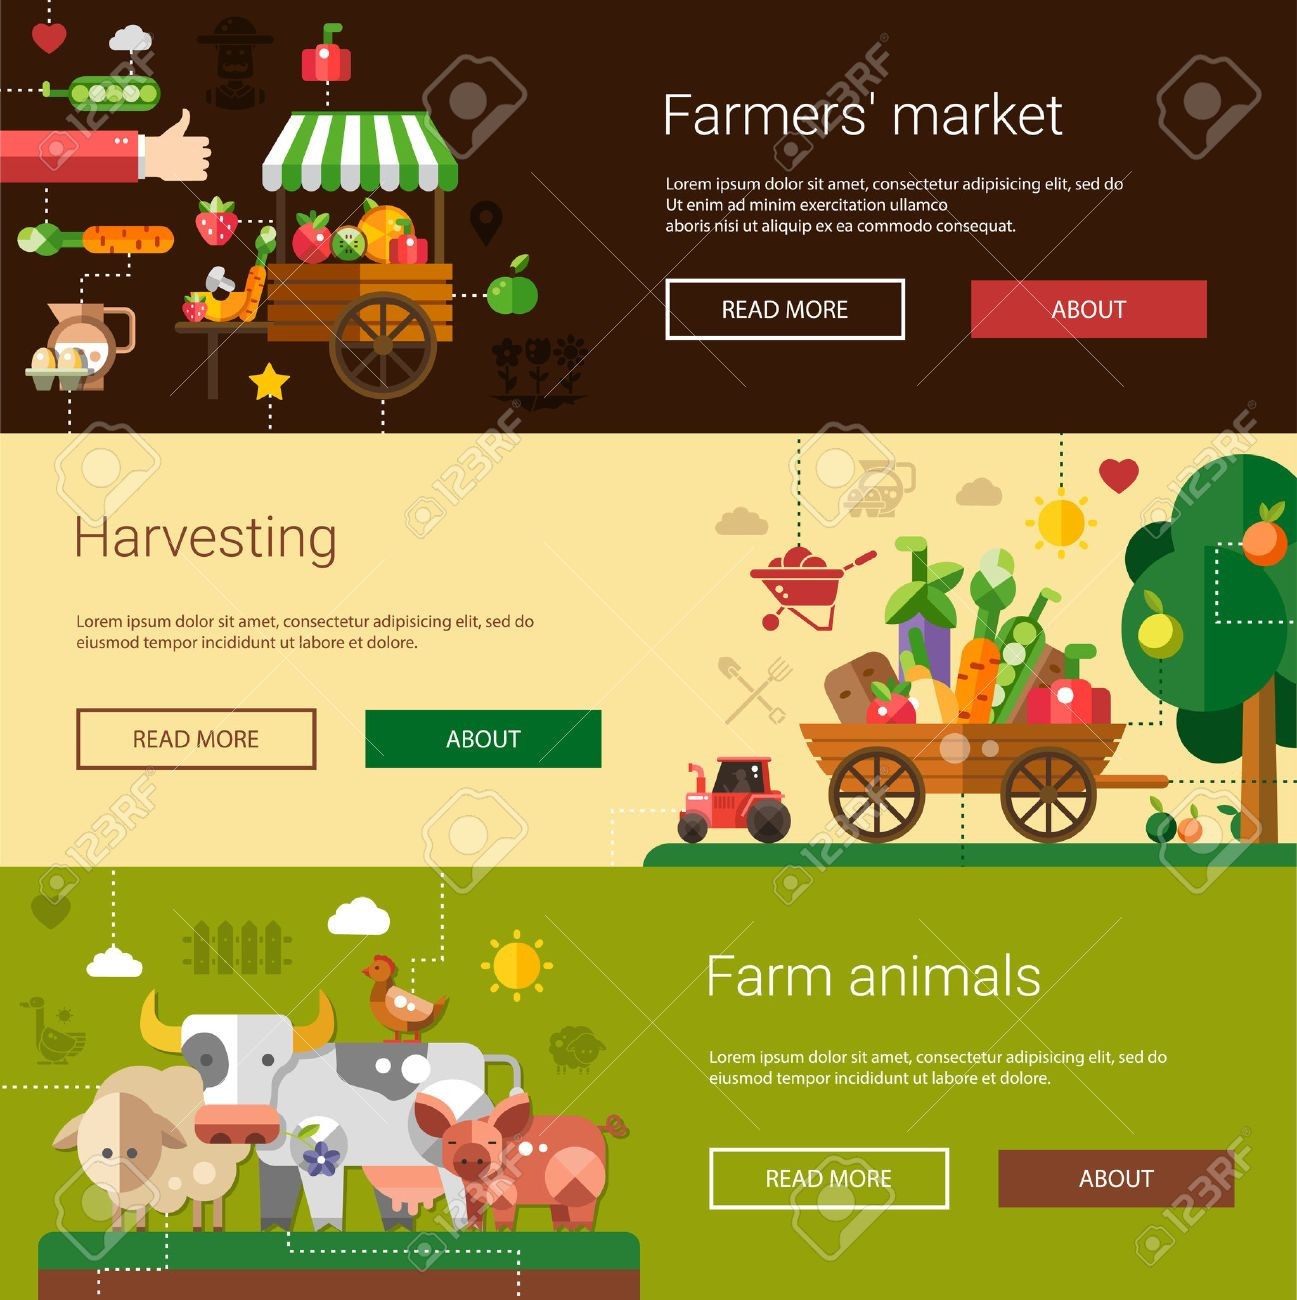 Free Farm Flyer Template Google Search CSA Pinterest Agriculture